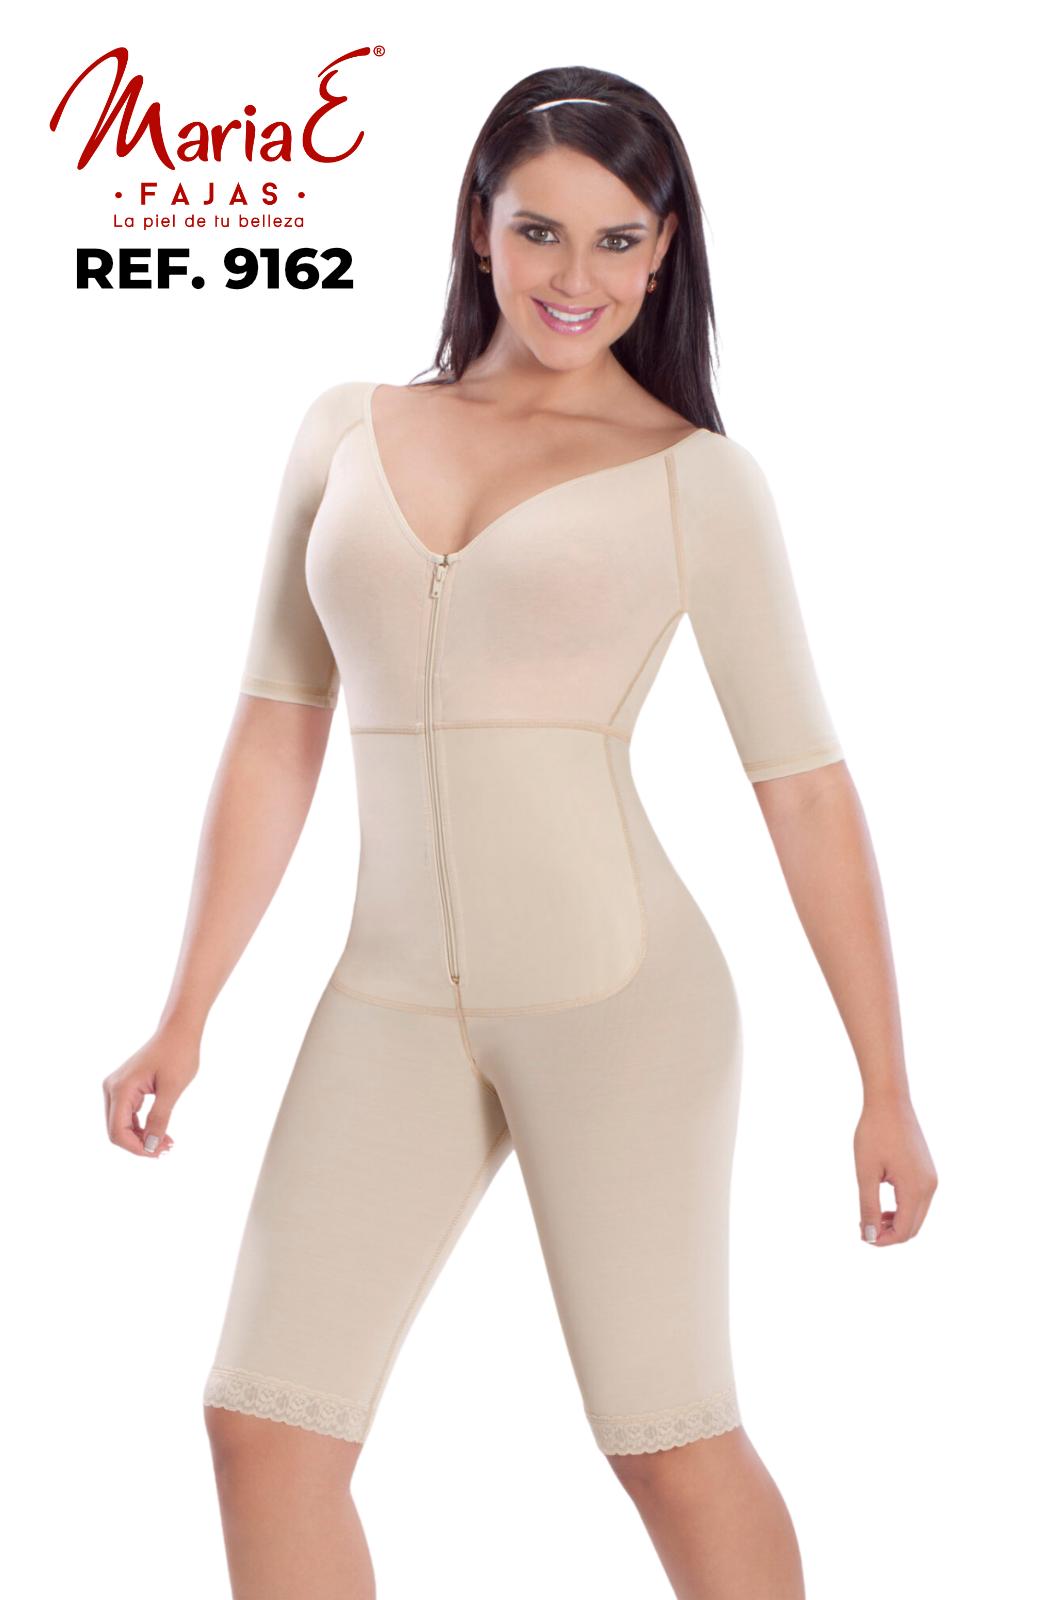 High Compression Post-Surgical Girdle with Sleeves